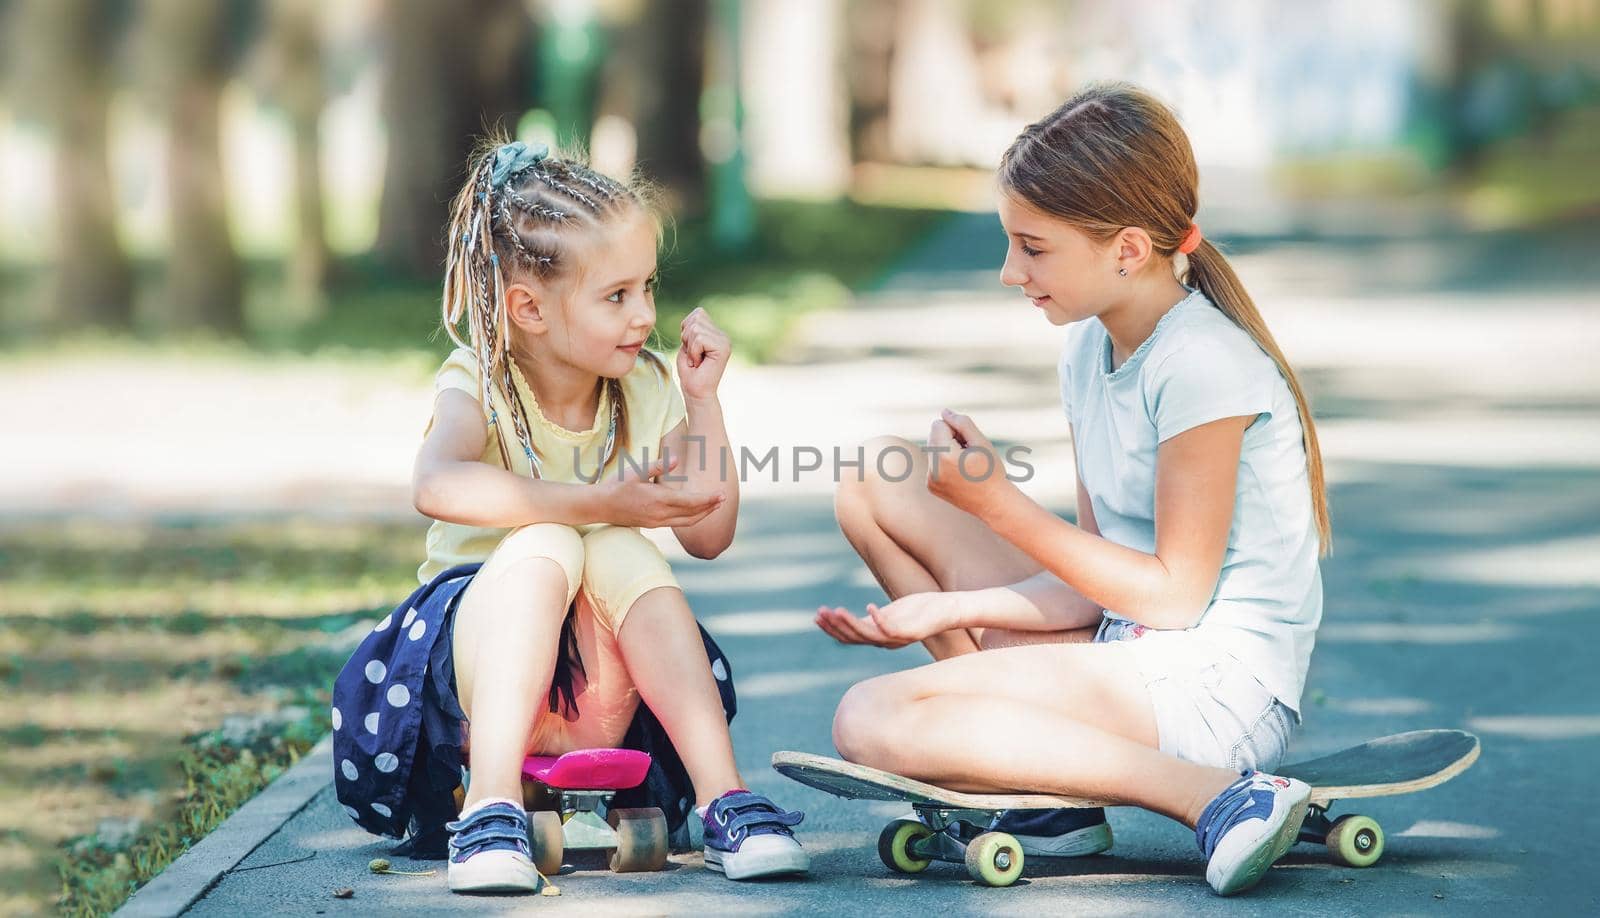 Beautiful little girls sitting on skateboards in the park and playing together in summertime